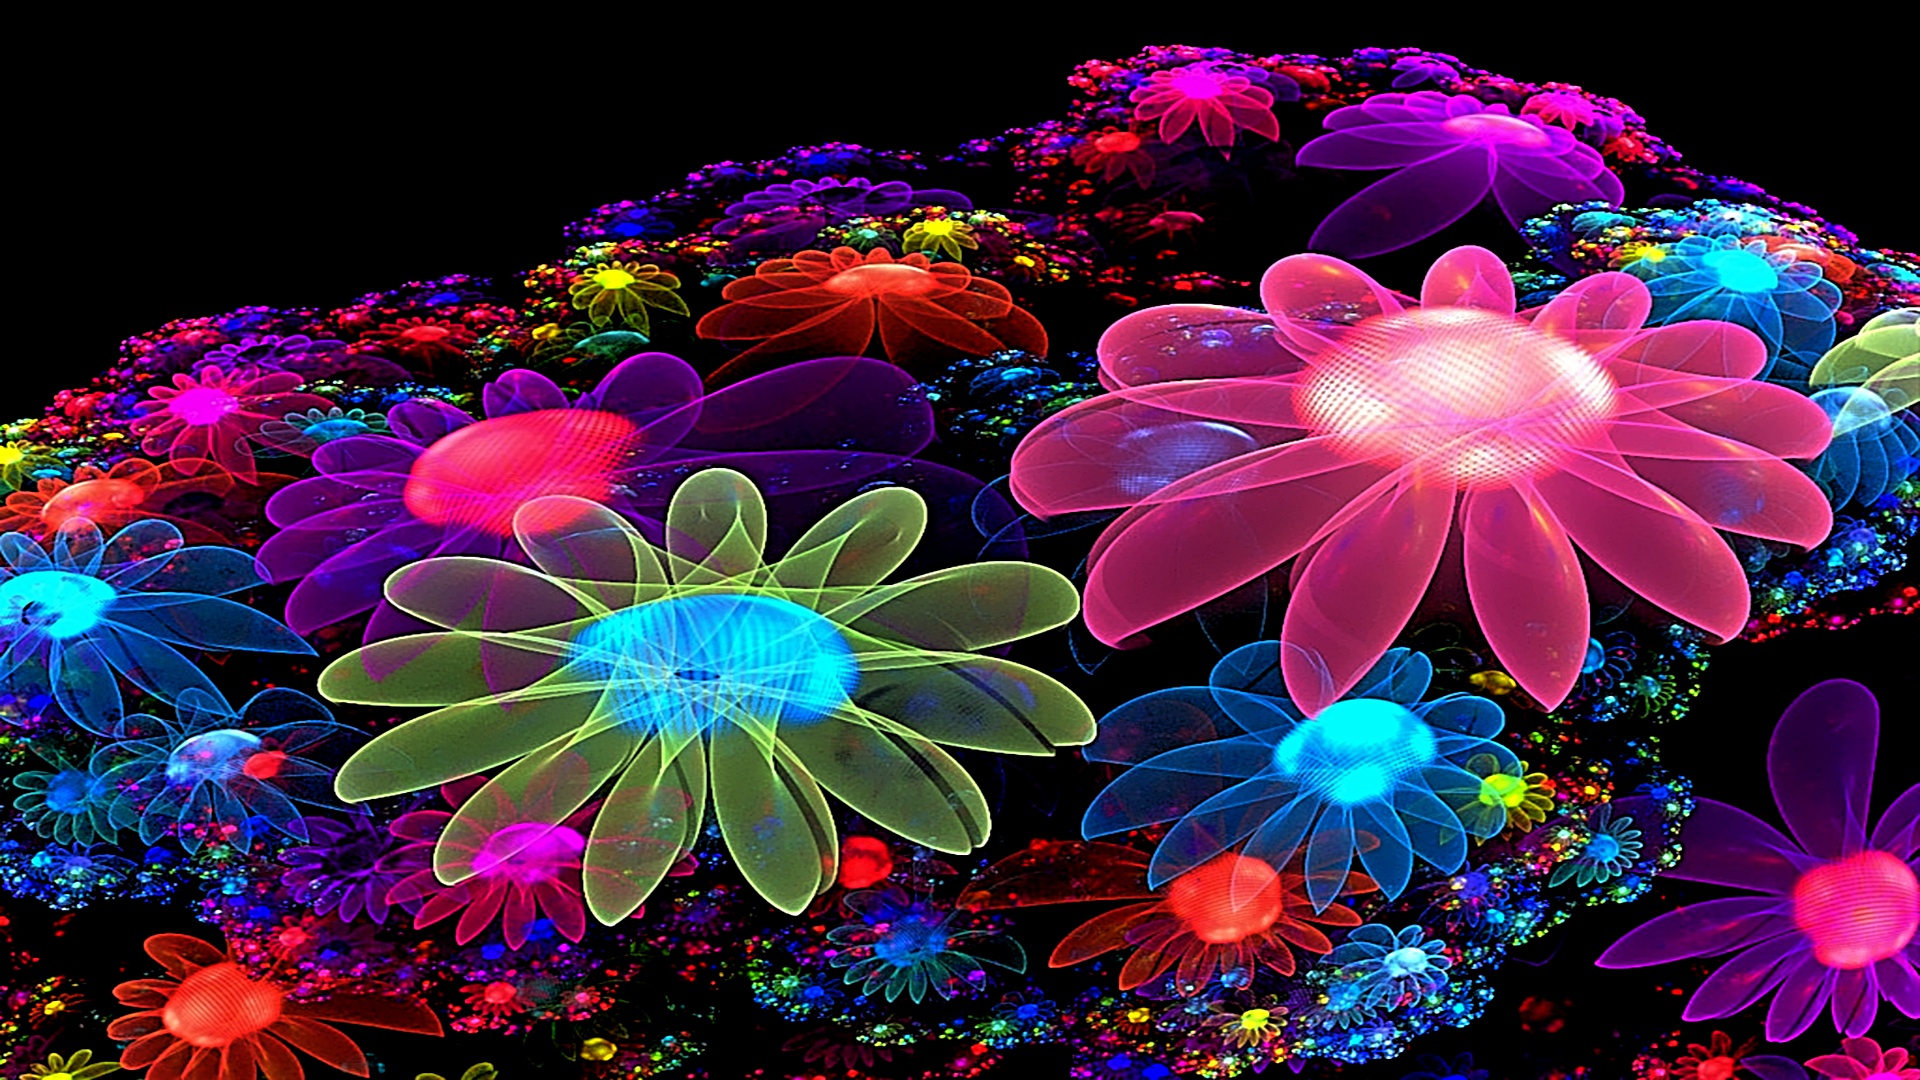 Cool Colorful Flowers Desktop Wallpapers Free Images 8221 HD